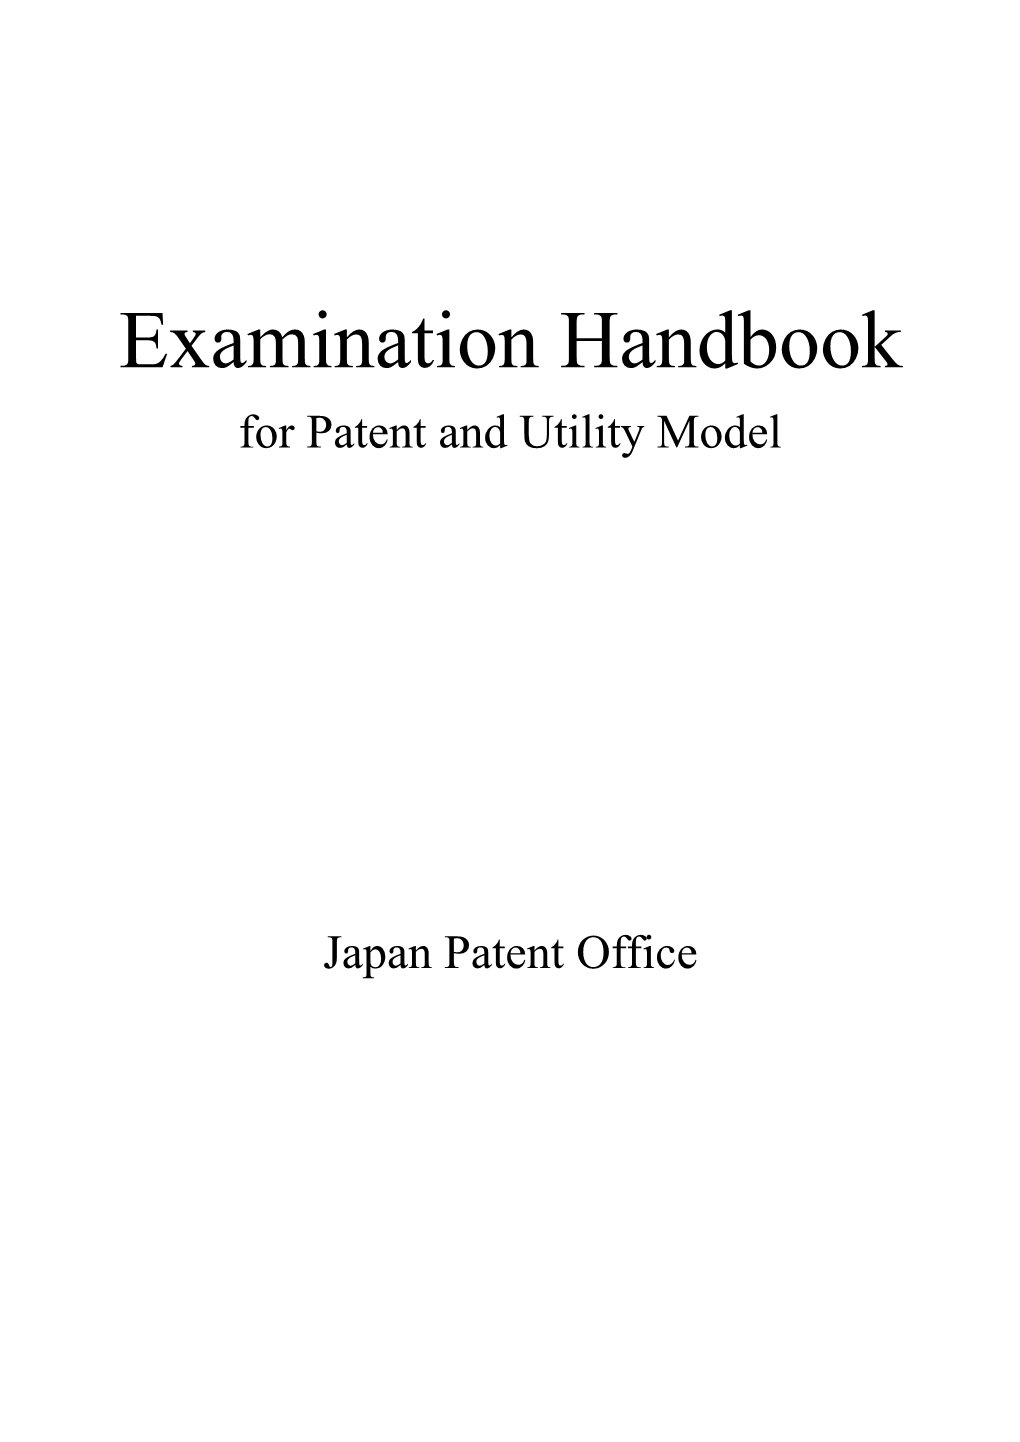 Examination Handbook for Patent and Utility Model in Japan